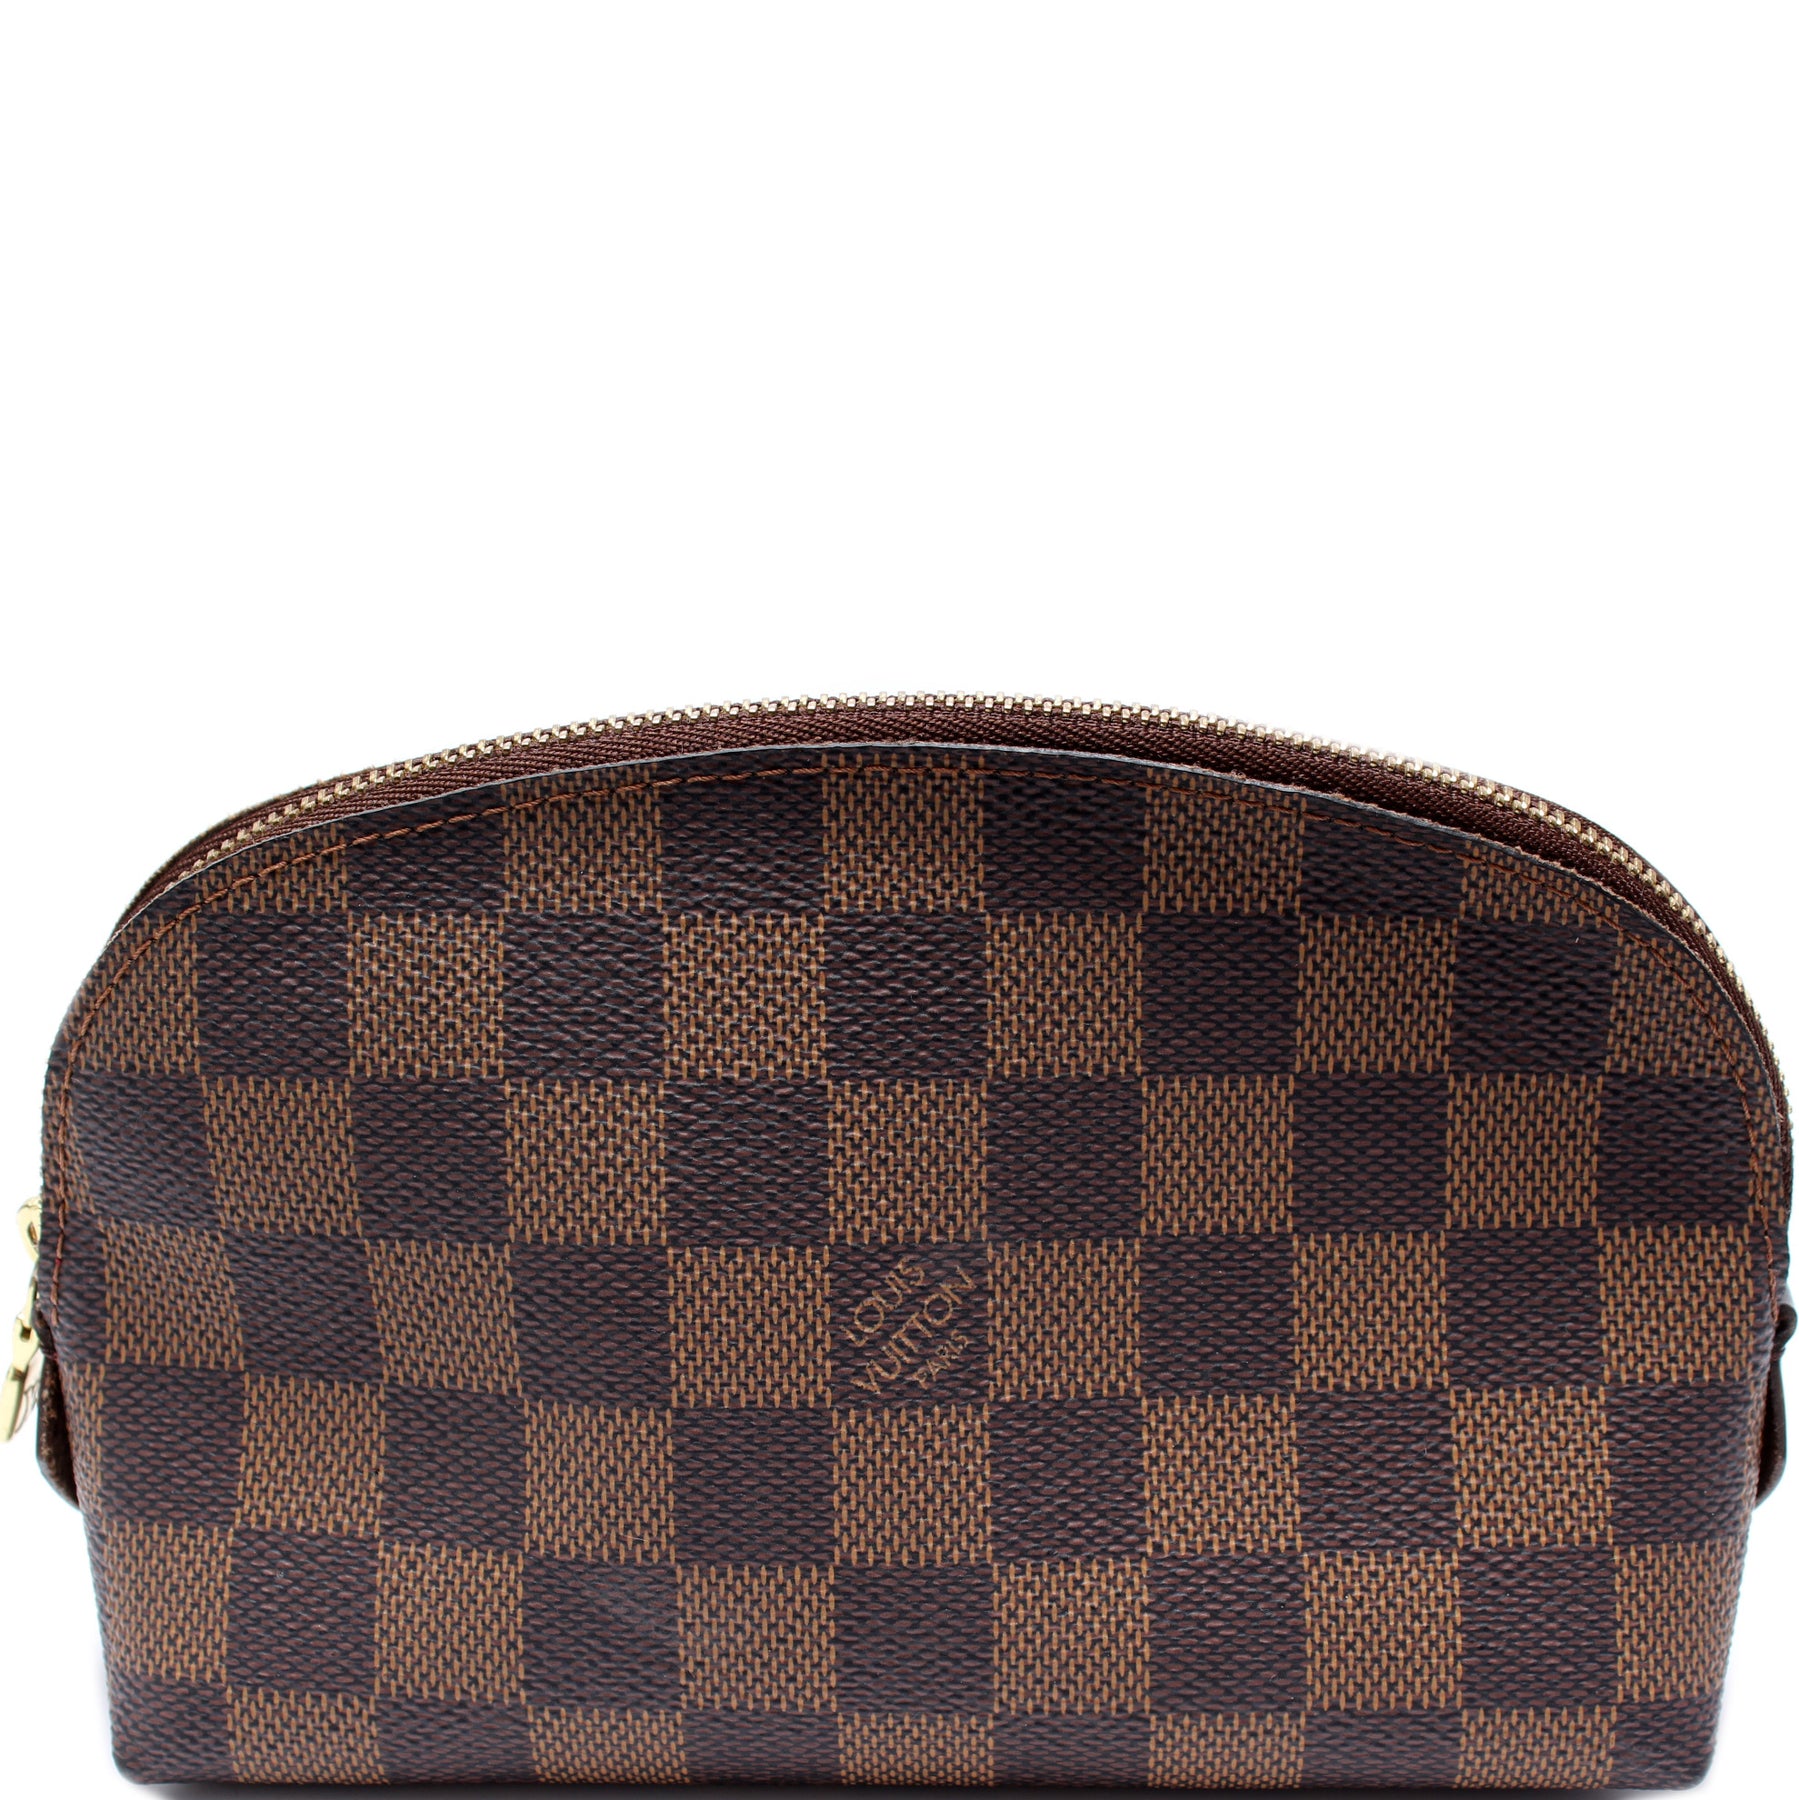 Lv Cosmetic Pouch Pm In Damier Ebene